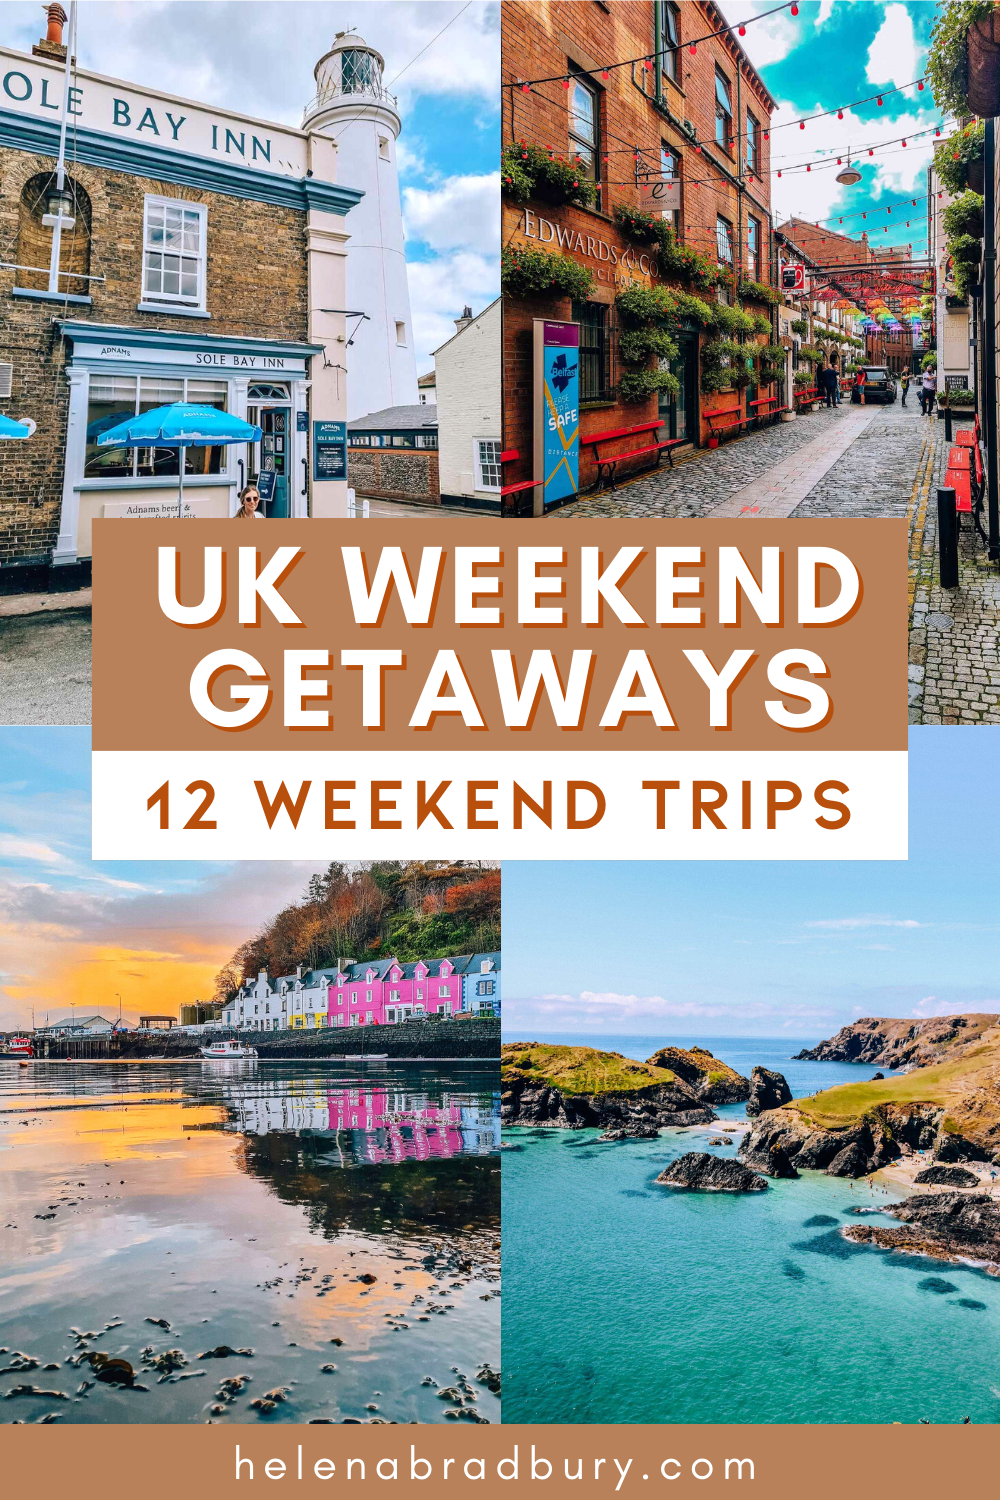 12 UK weekend break ideas to inspire your next UK short break or getaway. From the coast of Cornwall or Suffolk, to the Scottish Islands or a city break in Belfast or York. Plan the best UK weekend breaks | weekend away in uk | uk weekend away | week